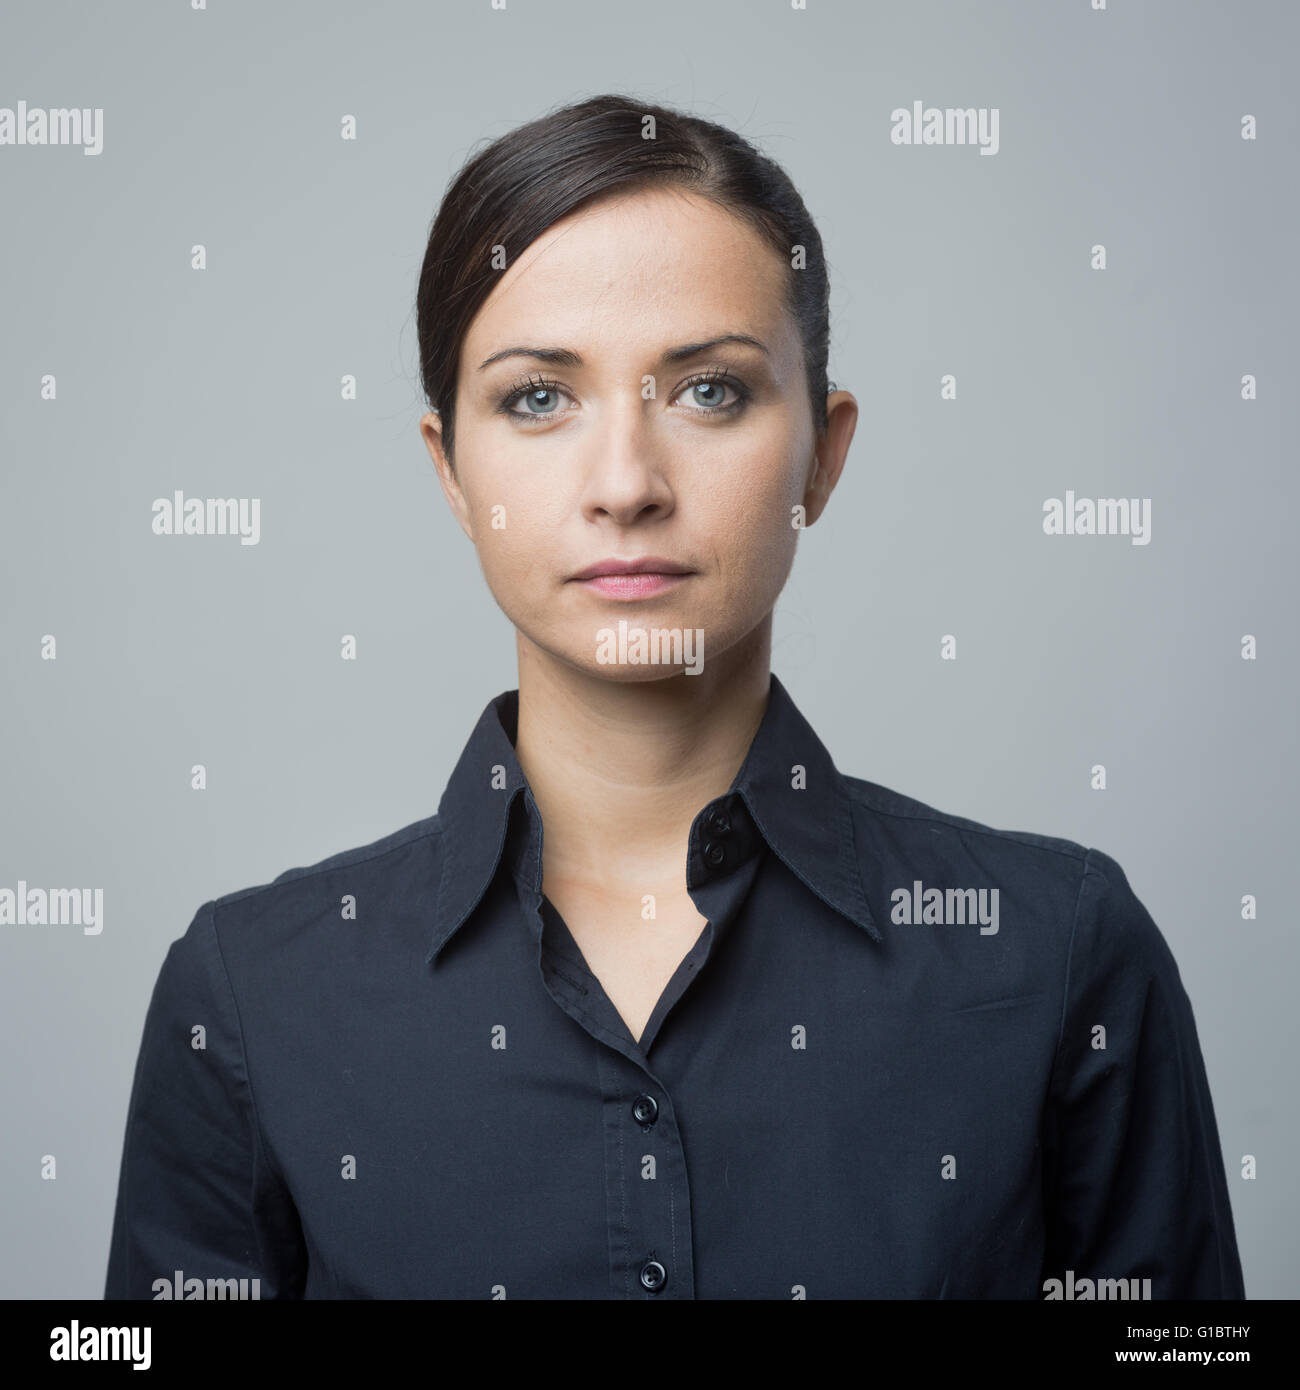 Serious confident woman in blue shirt staring at camera. Stock Photo